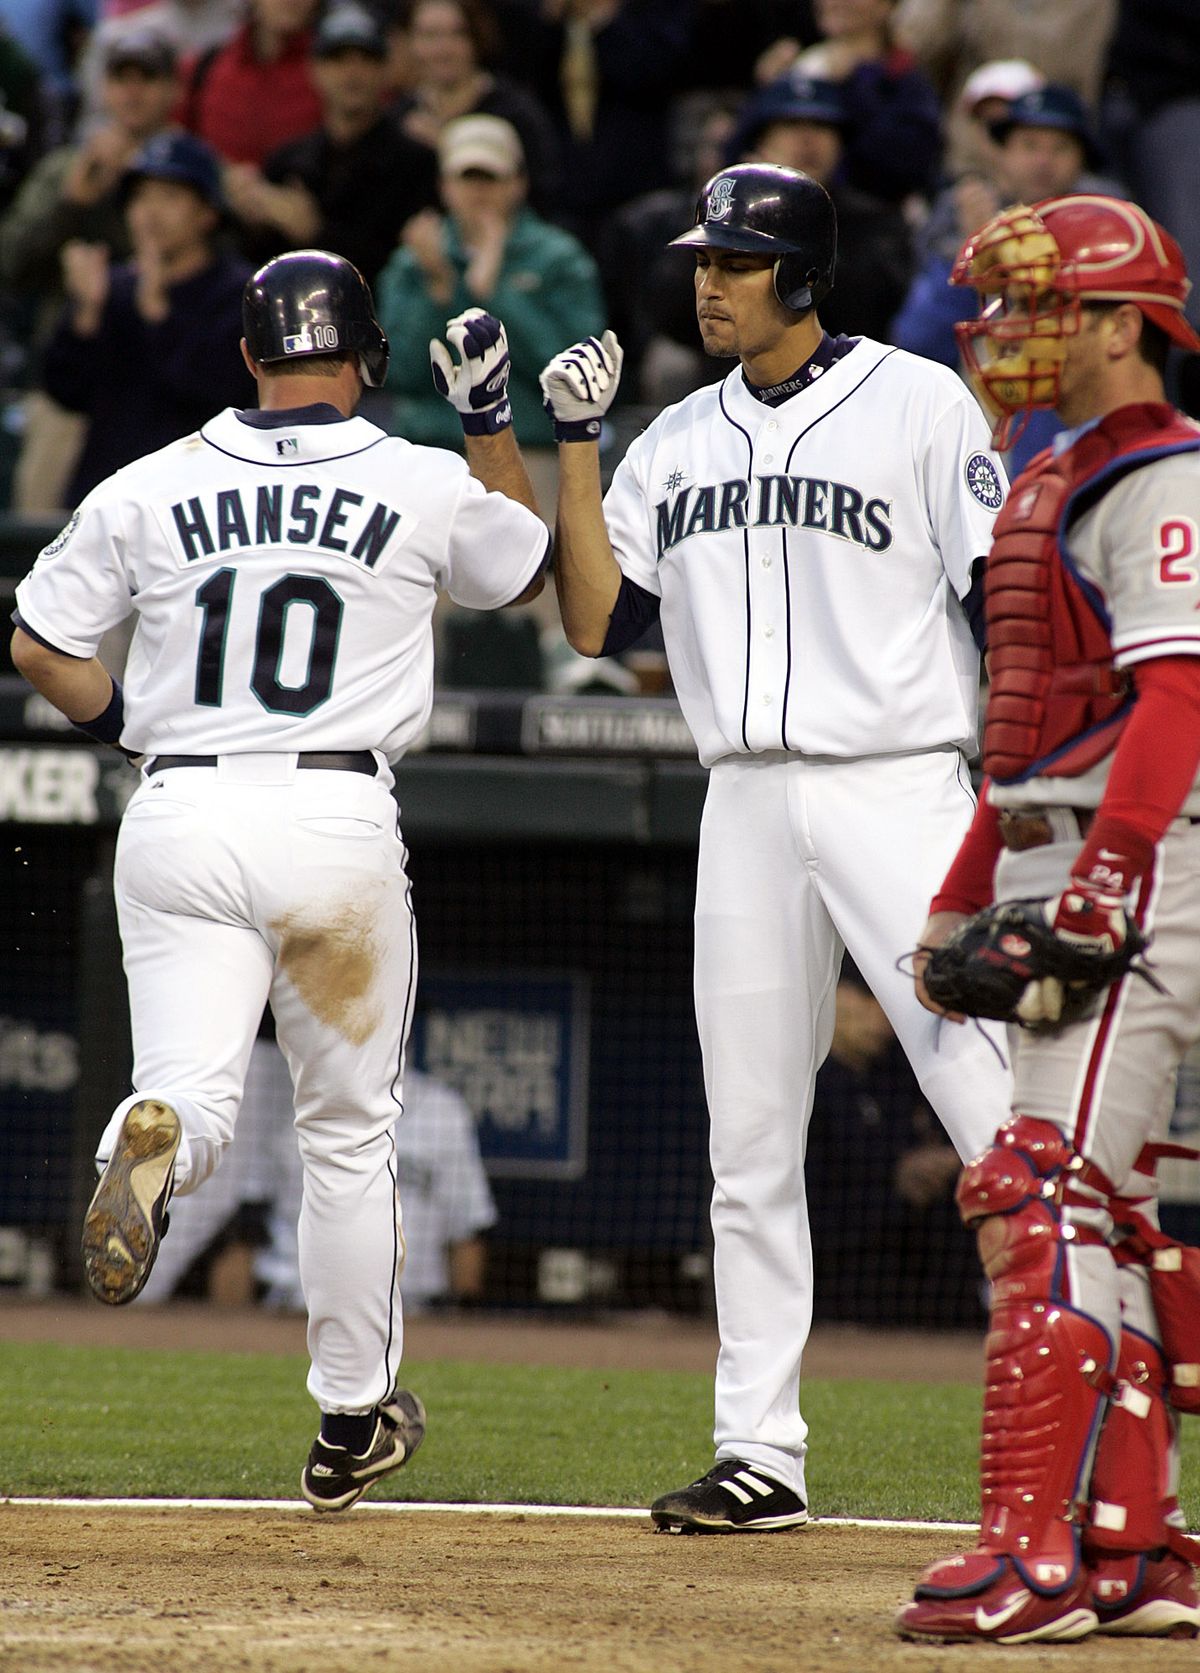 Seattle’s new hitting coach, Dave Hansen, played for the Mariners in 2004 and 2005. (Associated Press)